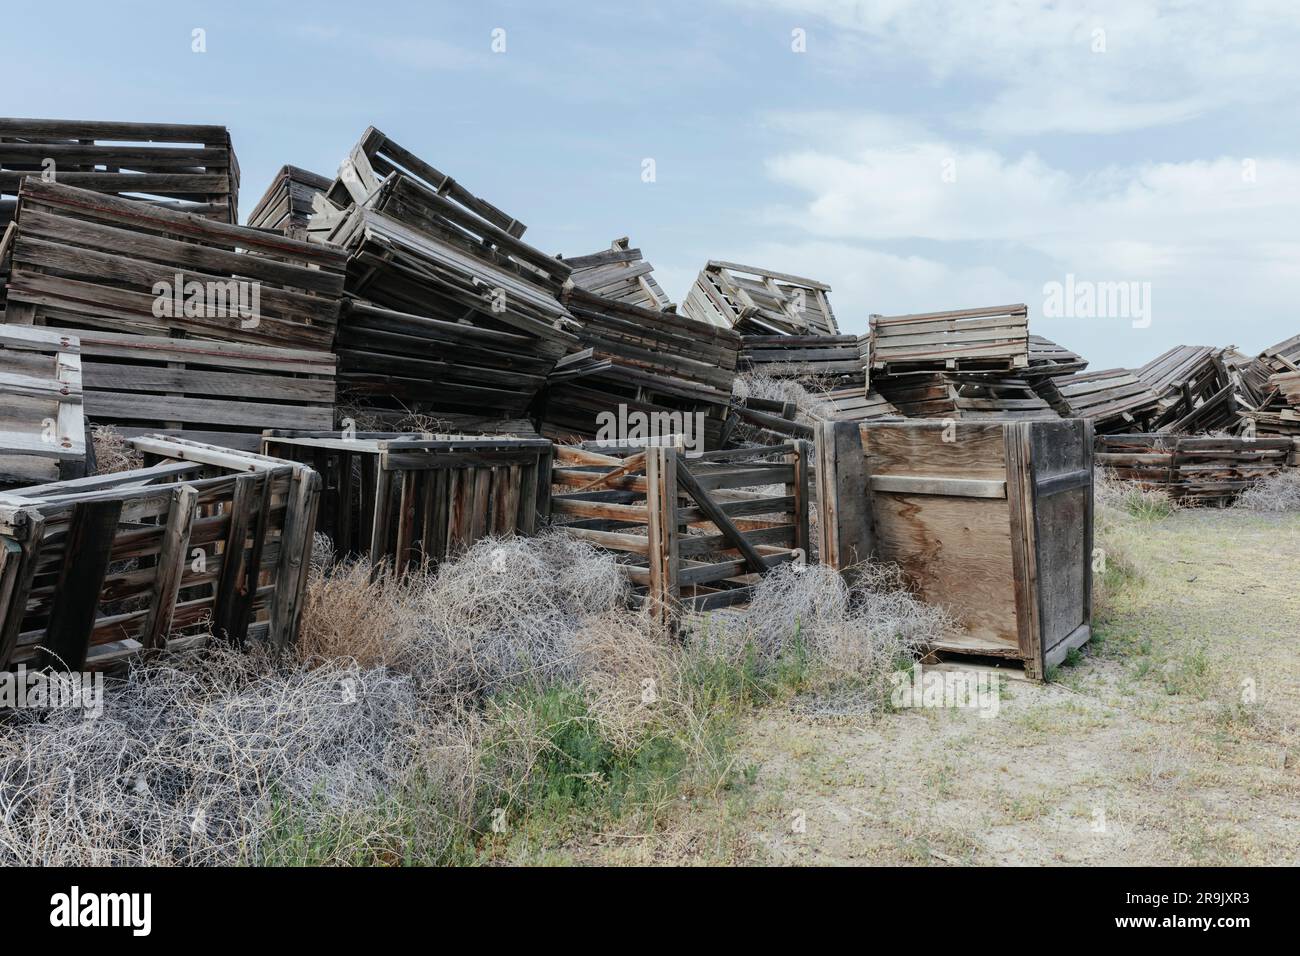 Pile of rotting discarded wooden fruit storage boxes or pallets, tumble weed scattered about. Stock Photo